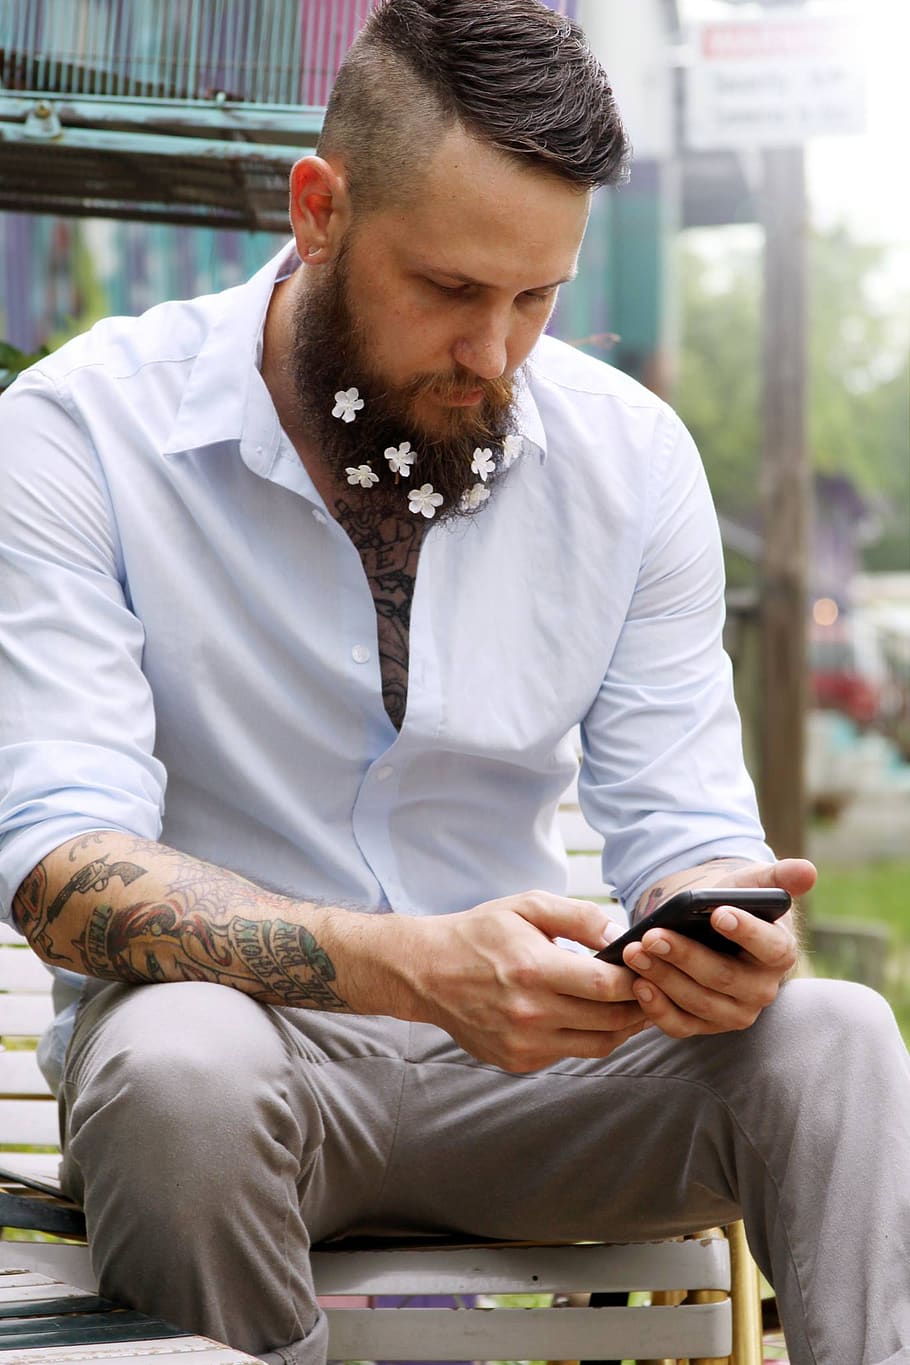 hipster, man, beard, style, sitting, phone, business, flowers, guy, male